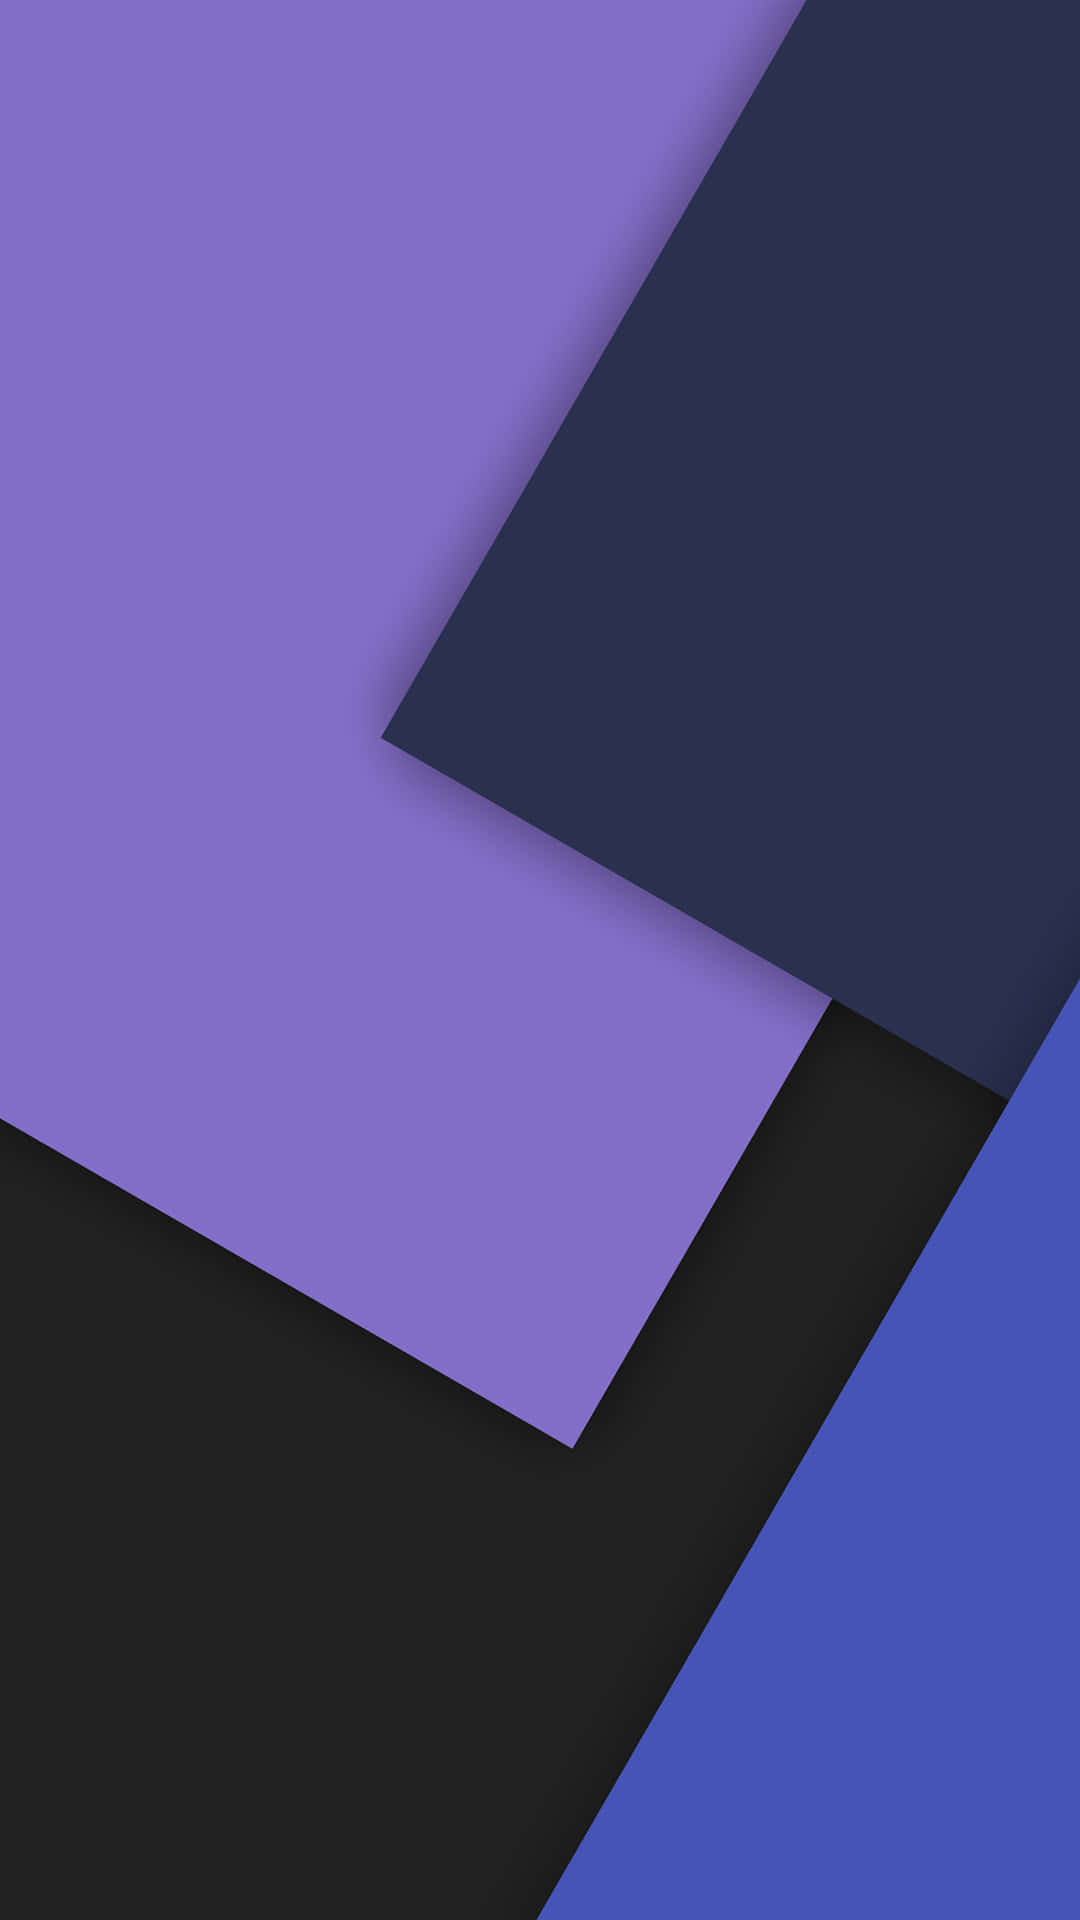 A Purple, Blue, And Black Background With A Triangle Wallpaper